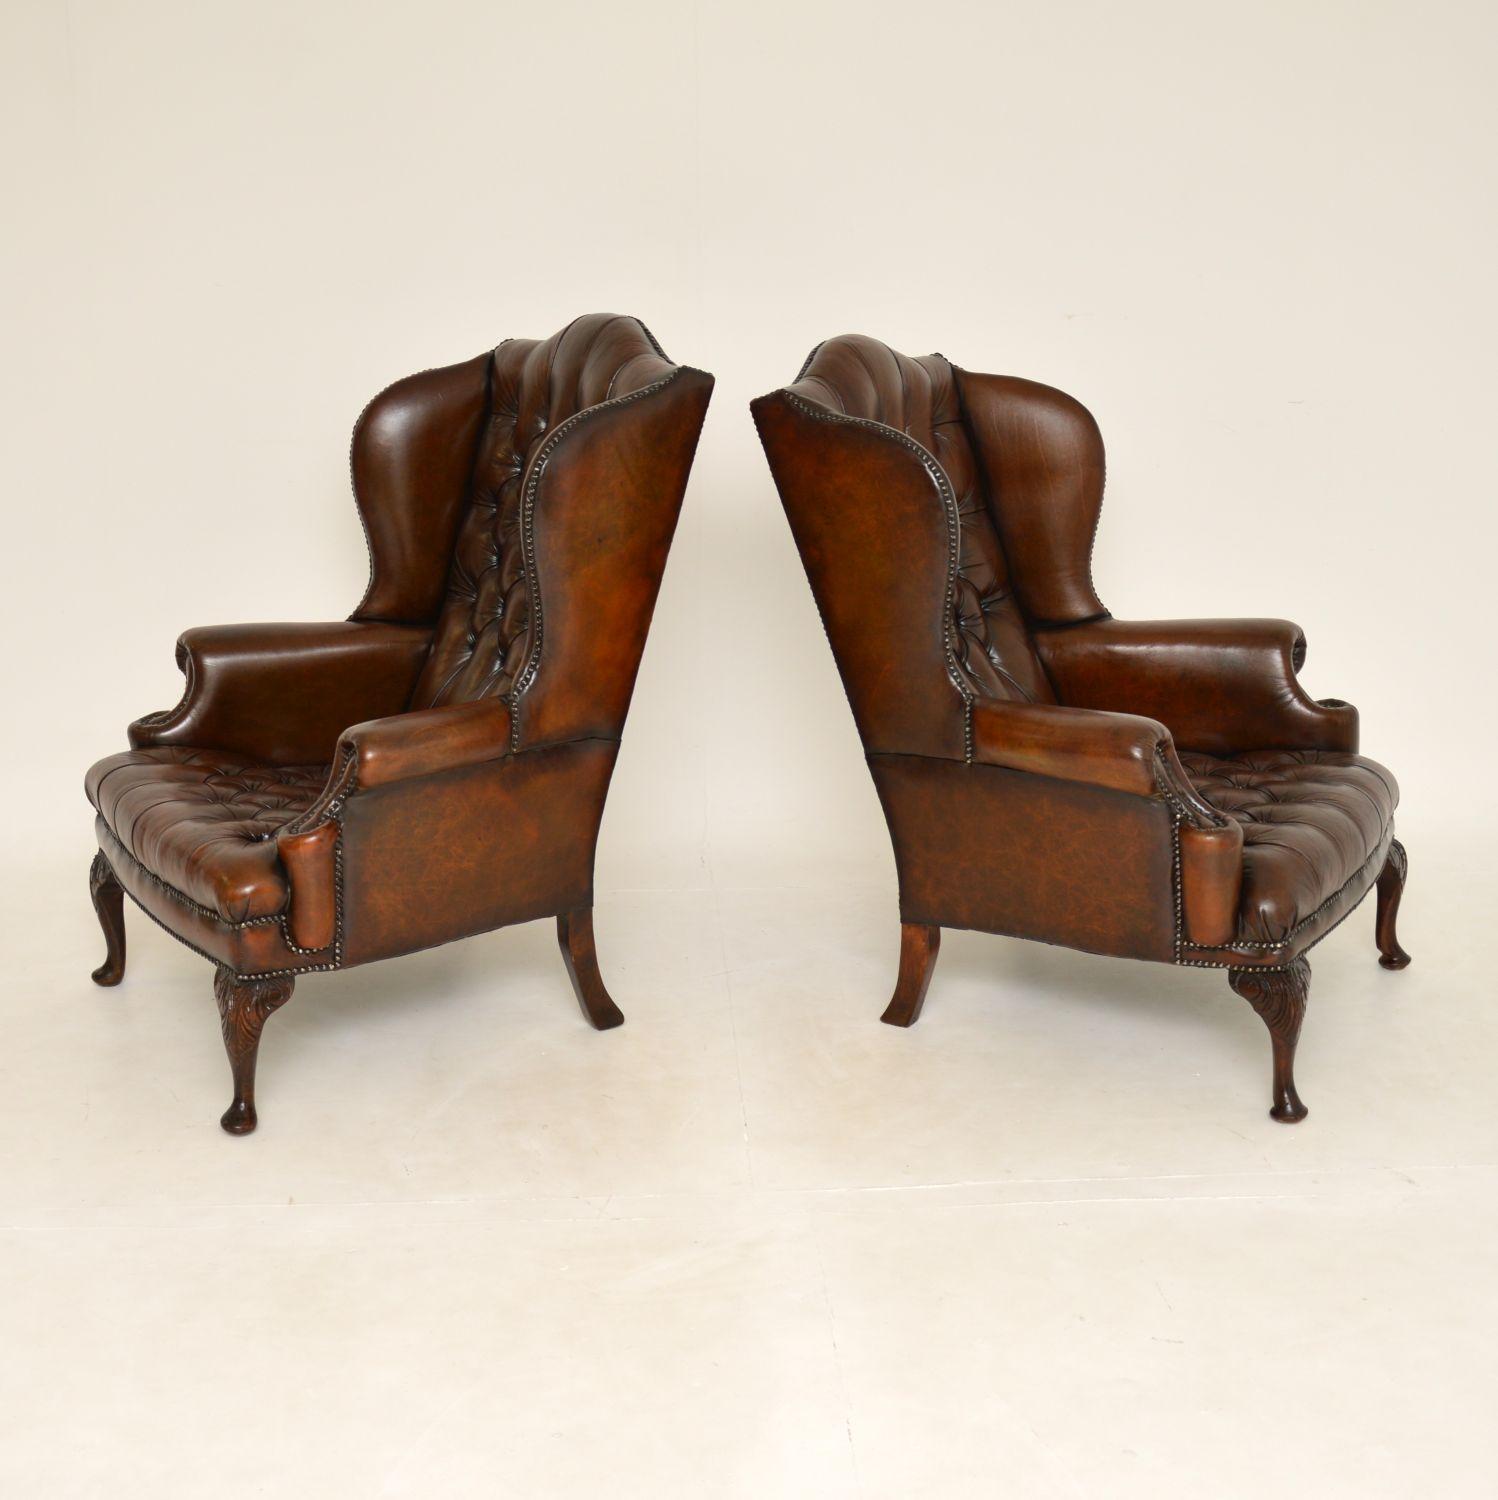 Chippendale Pair of Antique Leather Wing Back Armchairs